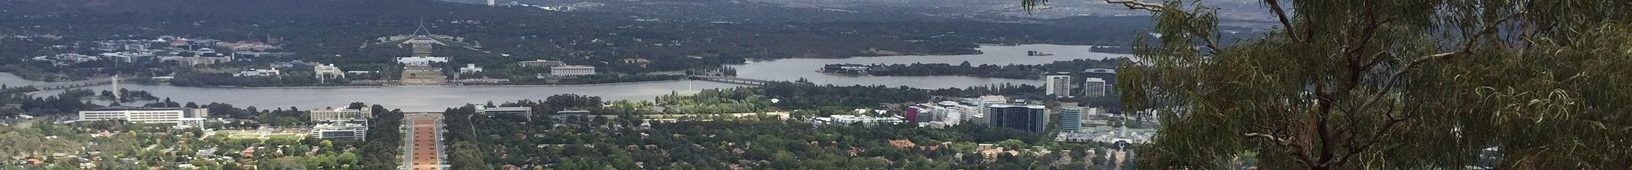 Lake Burley Griffin, West Basin, Block 23 Section 33 Acton Waterfront: Works Application consultation on boardwalk and infill